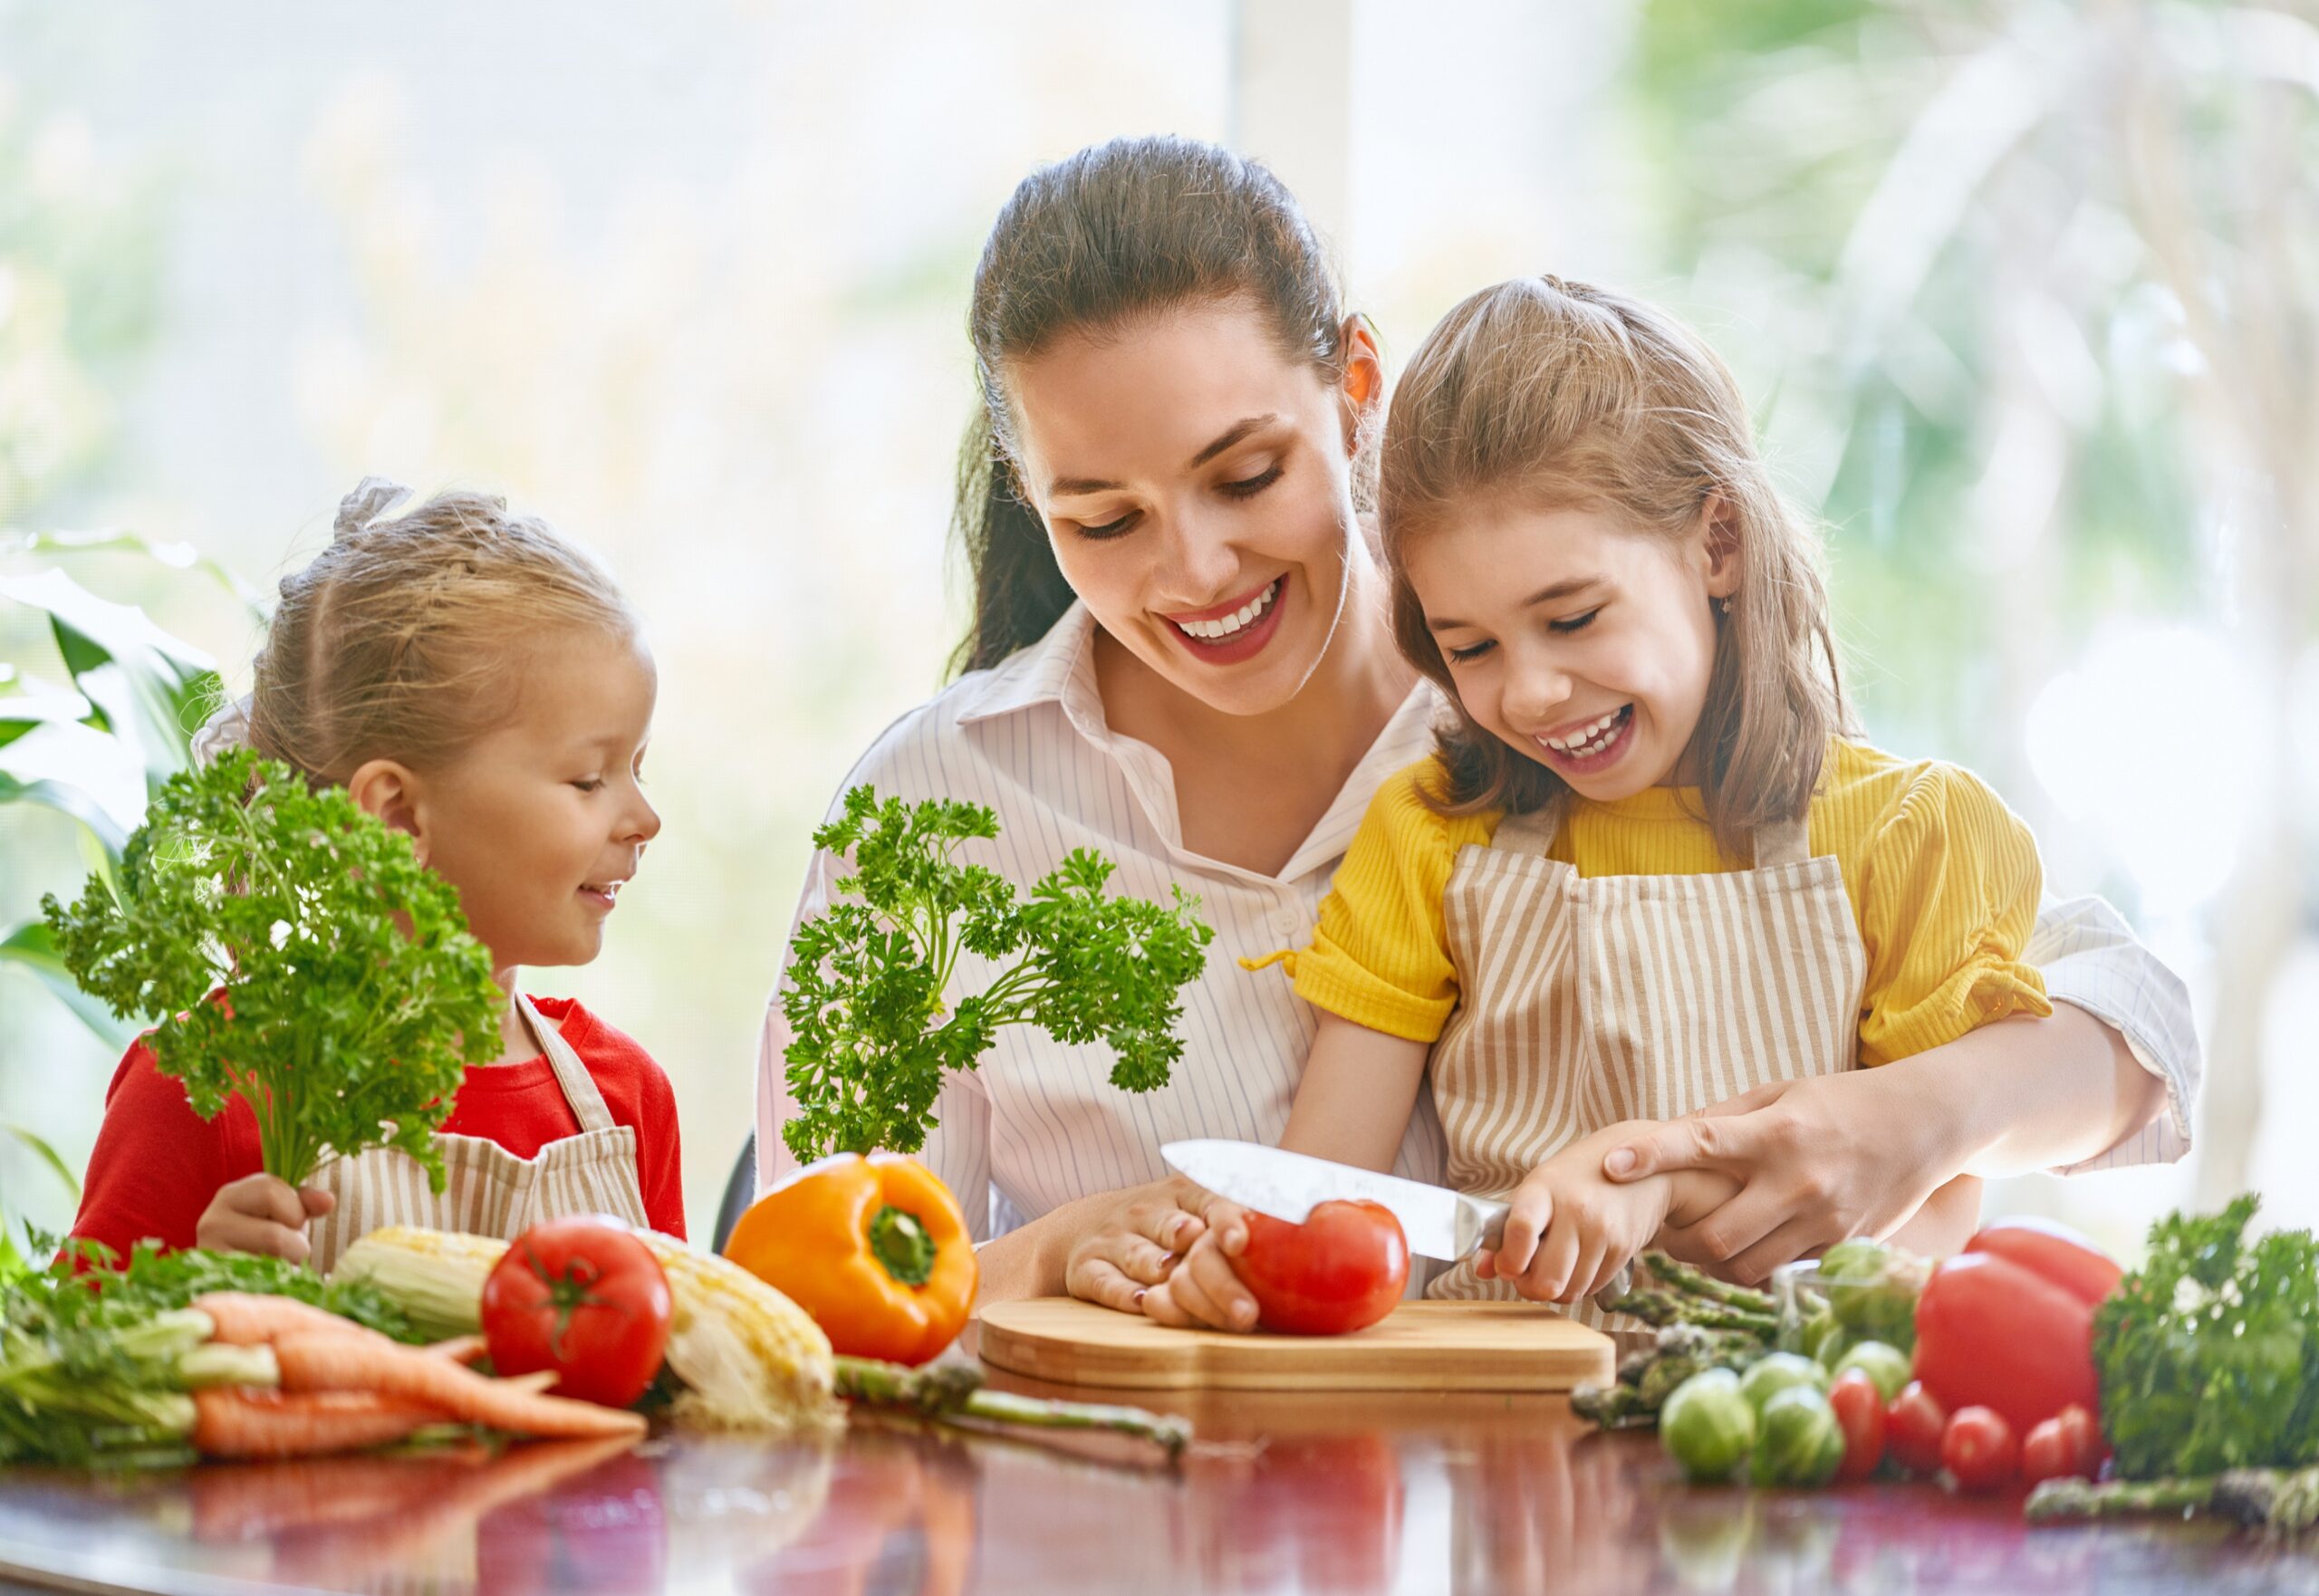 Motivate children to consume more fruit and vegetables